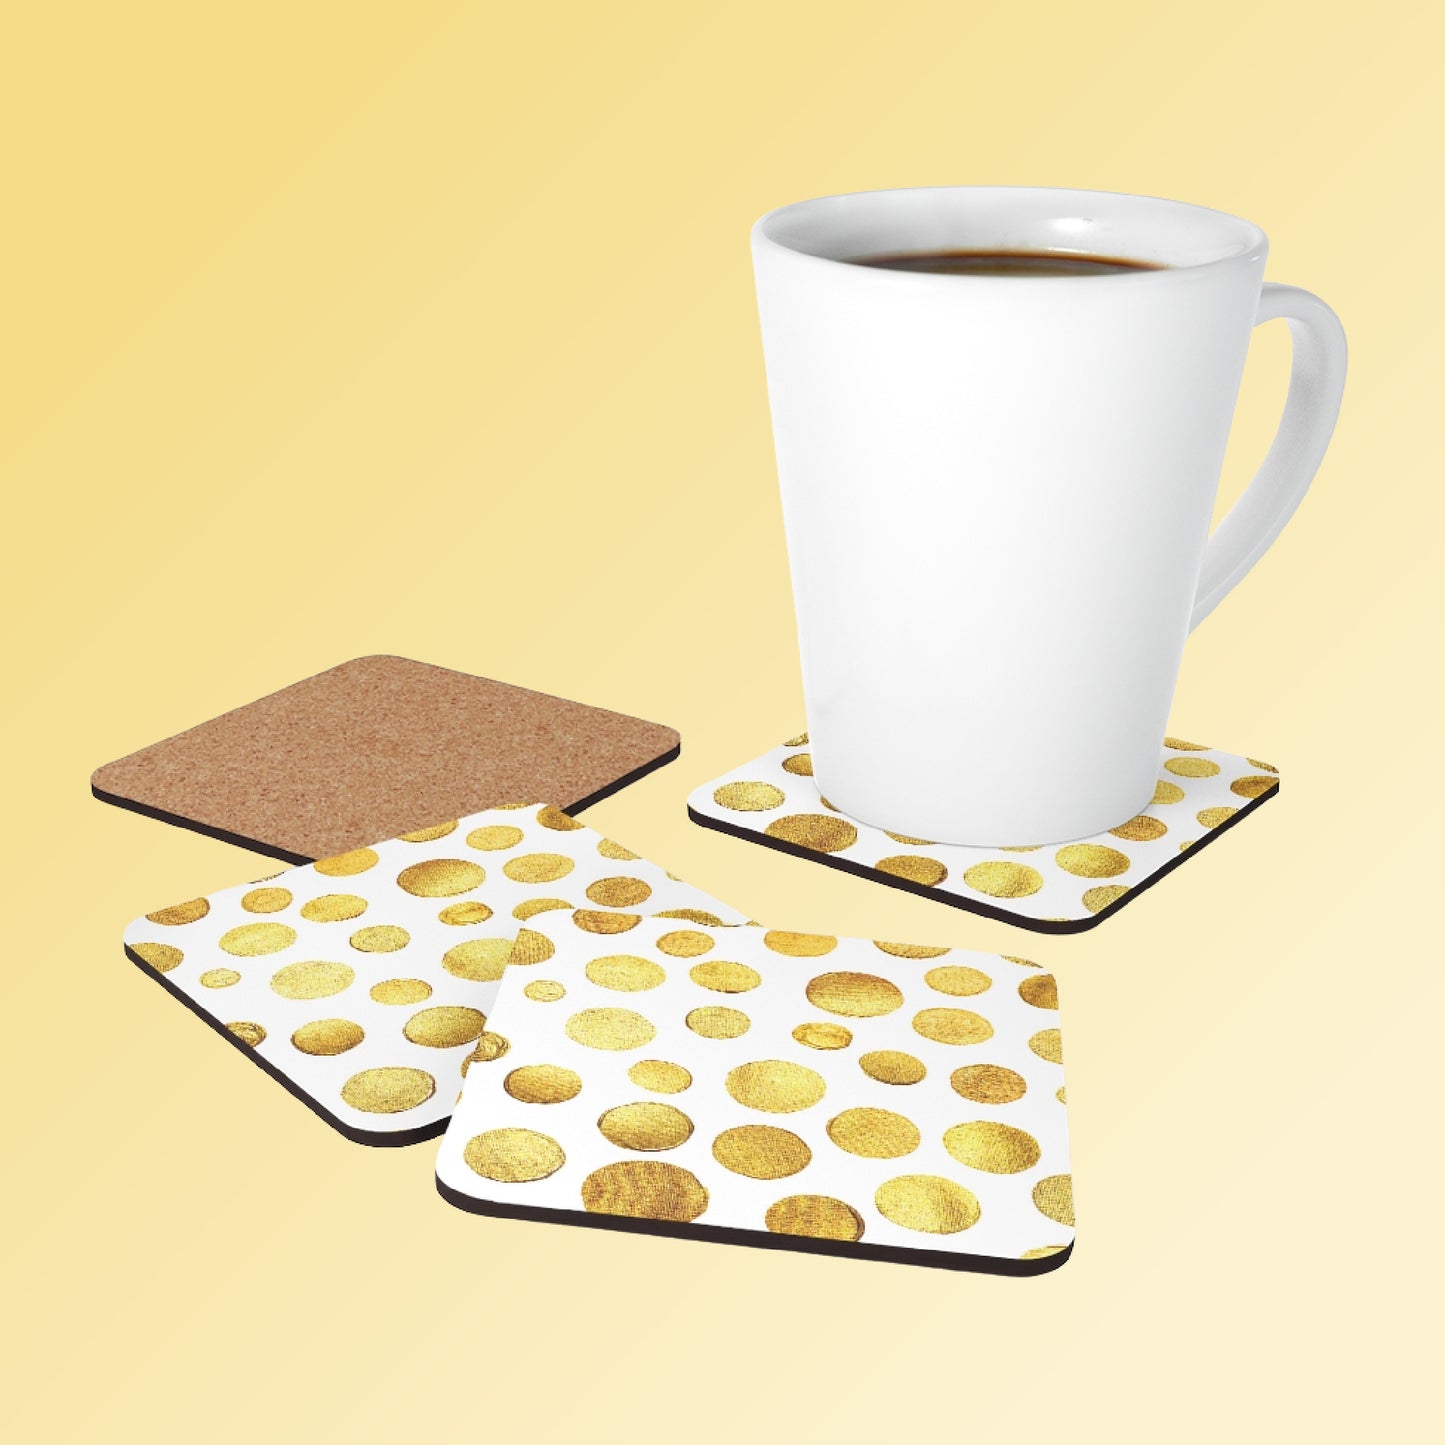 Mock up of a white latte mug on one of the coasters